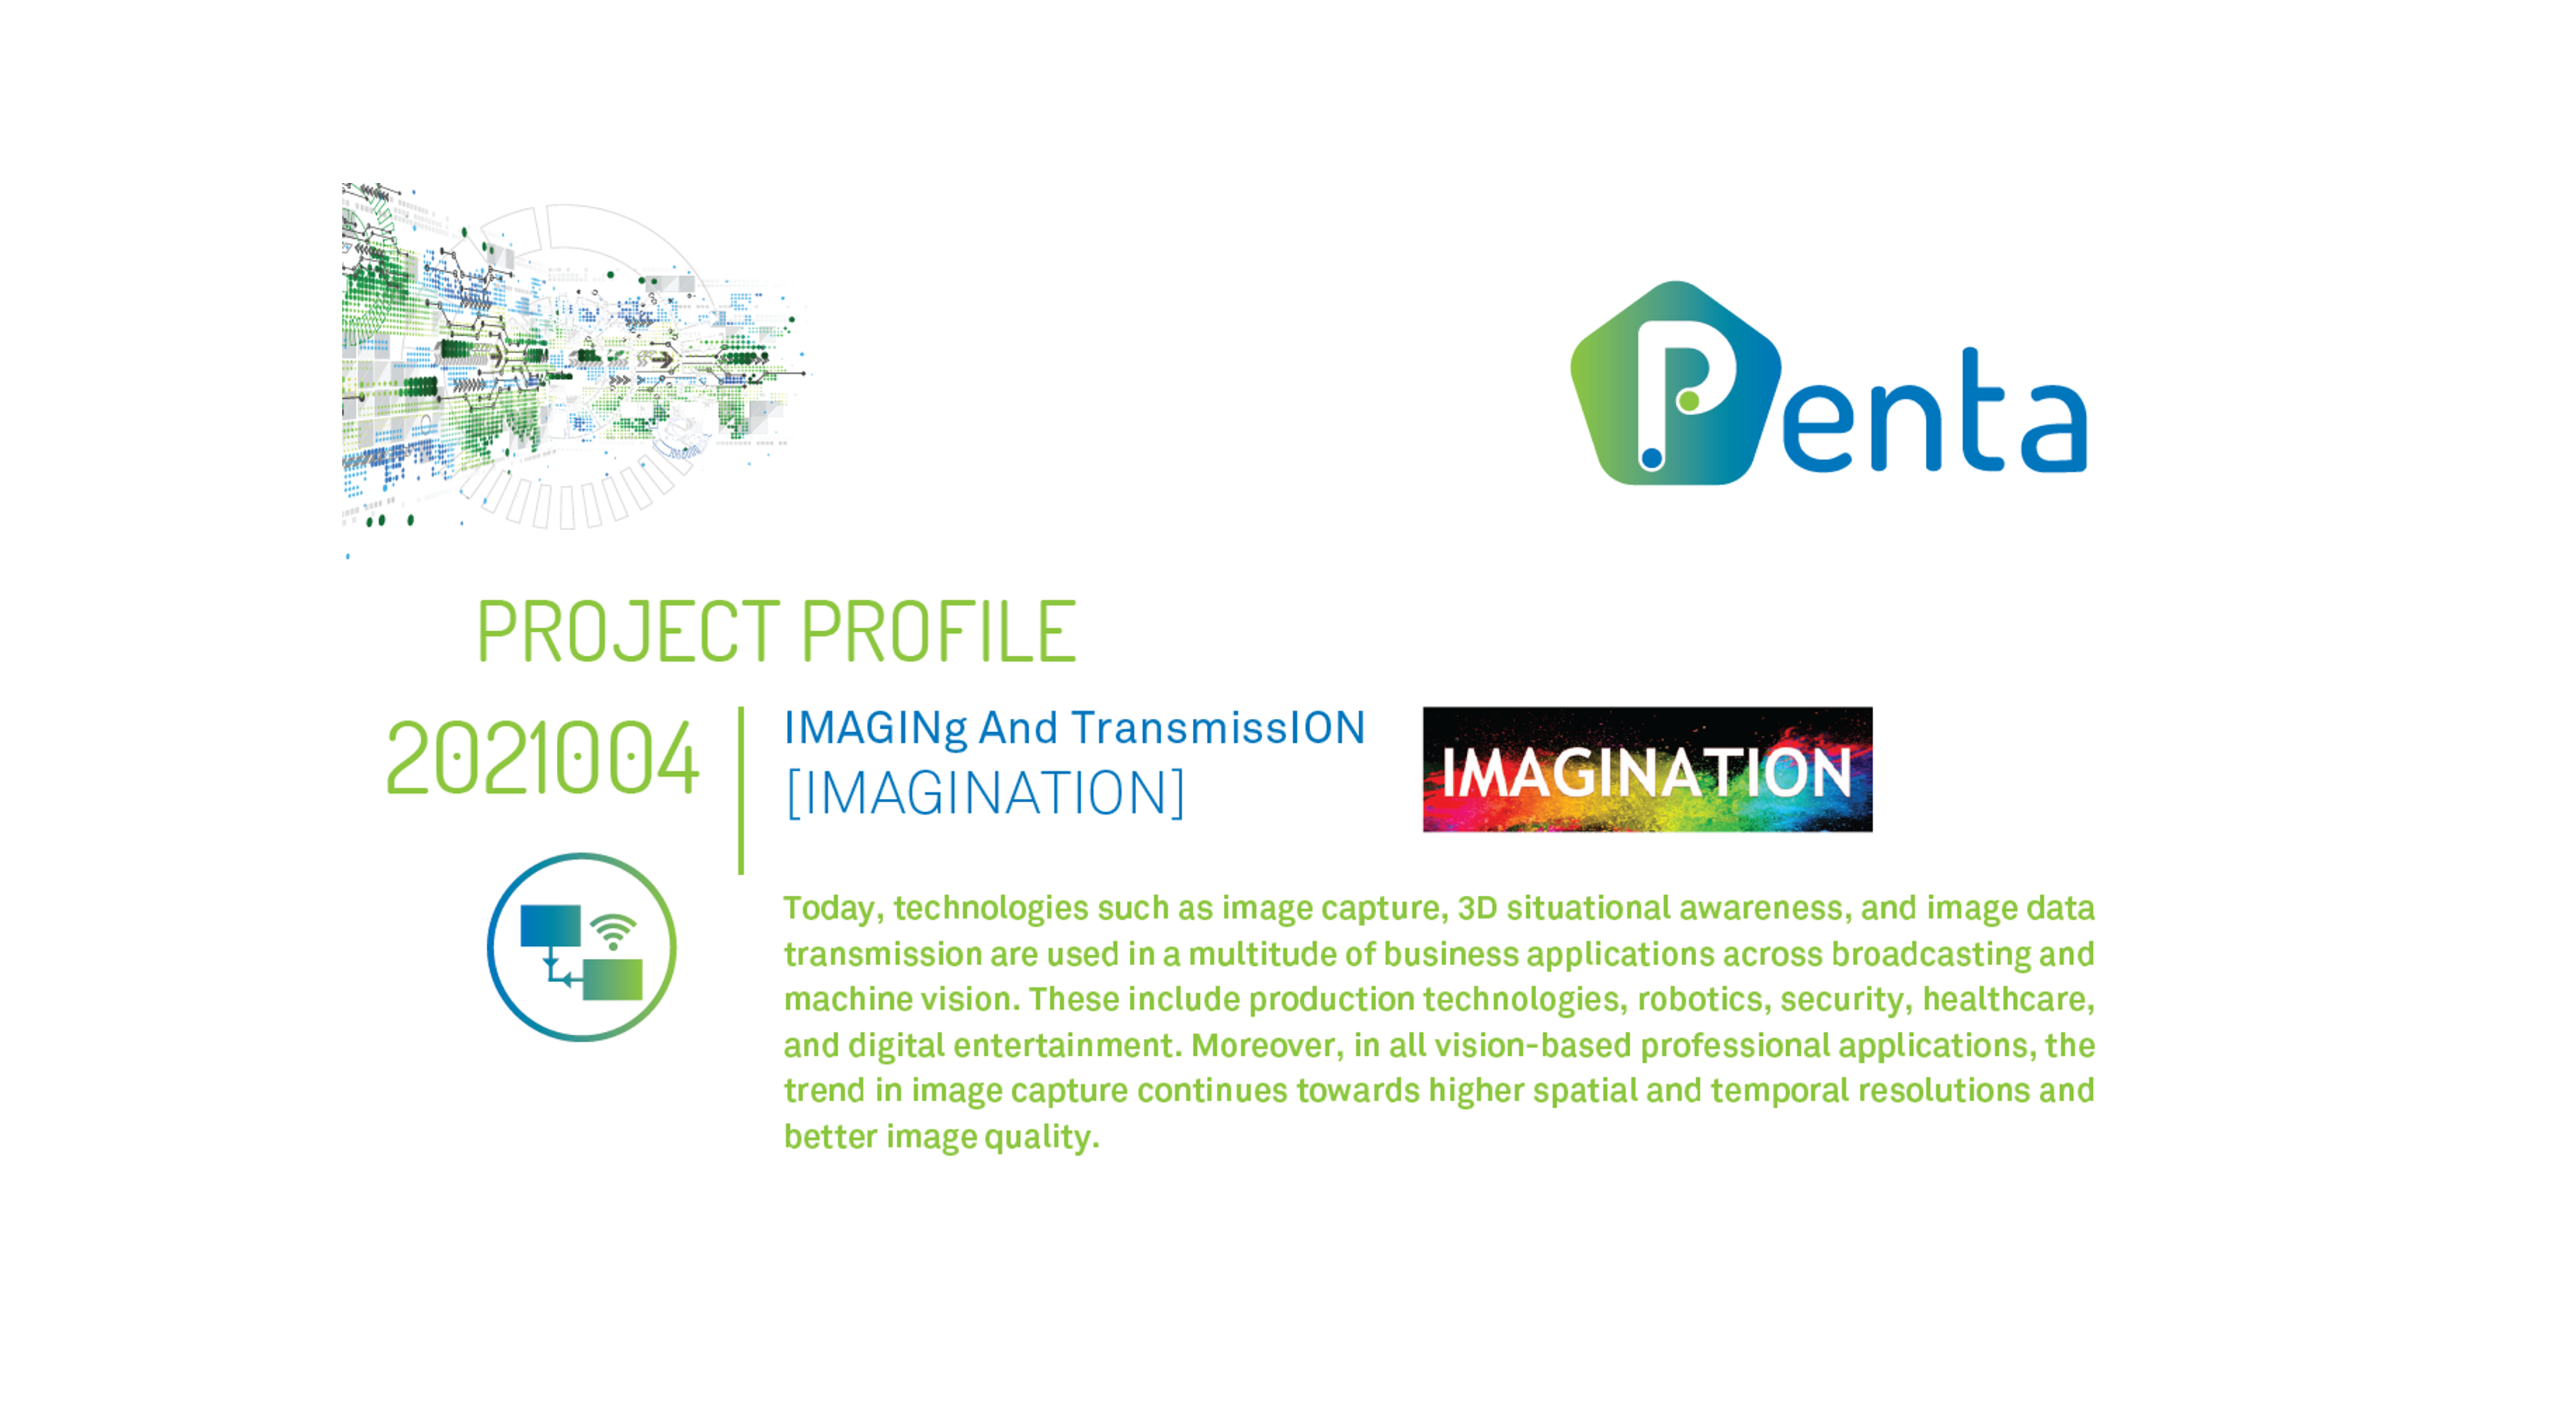 IMAGINATION Project Profile Now Available